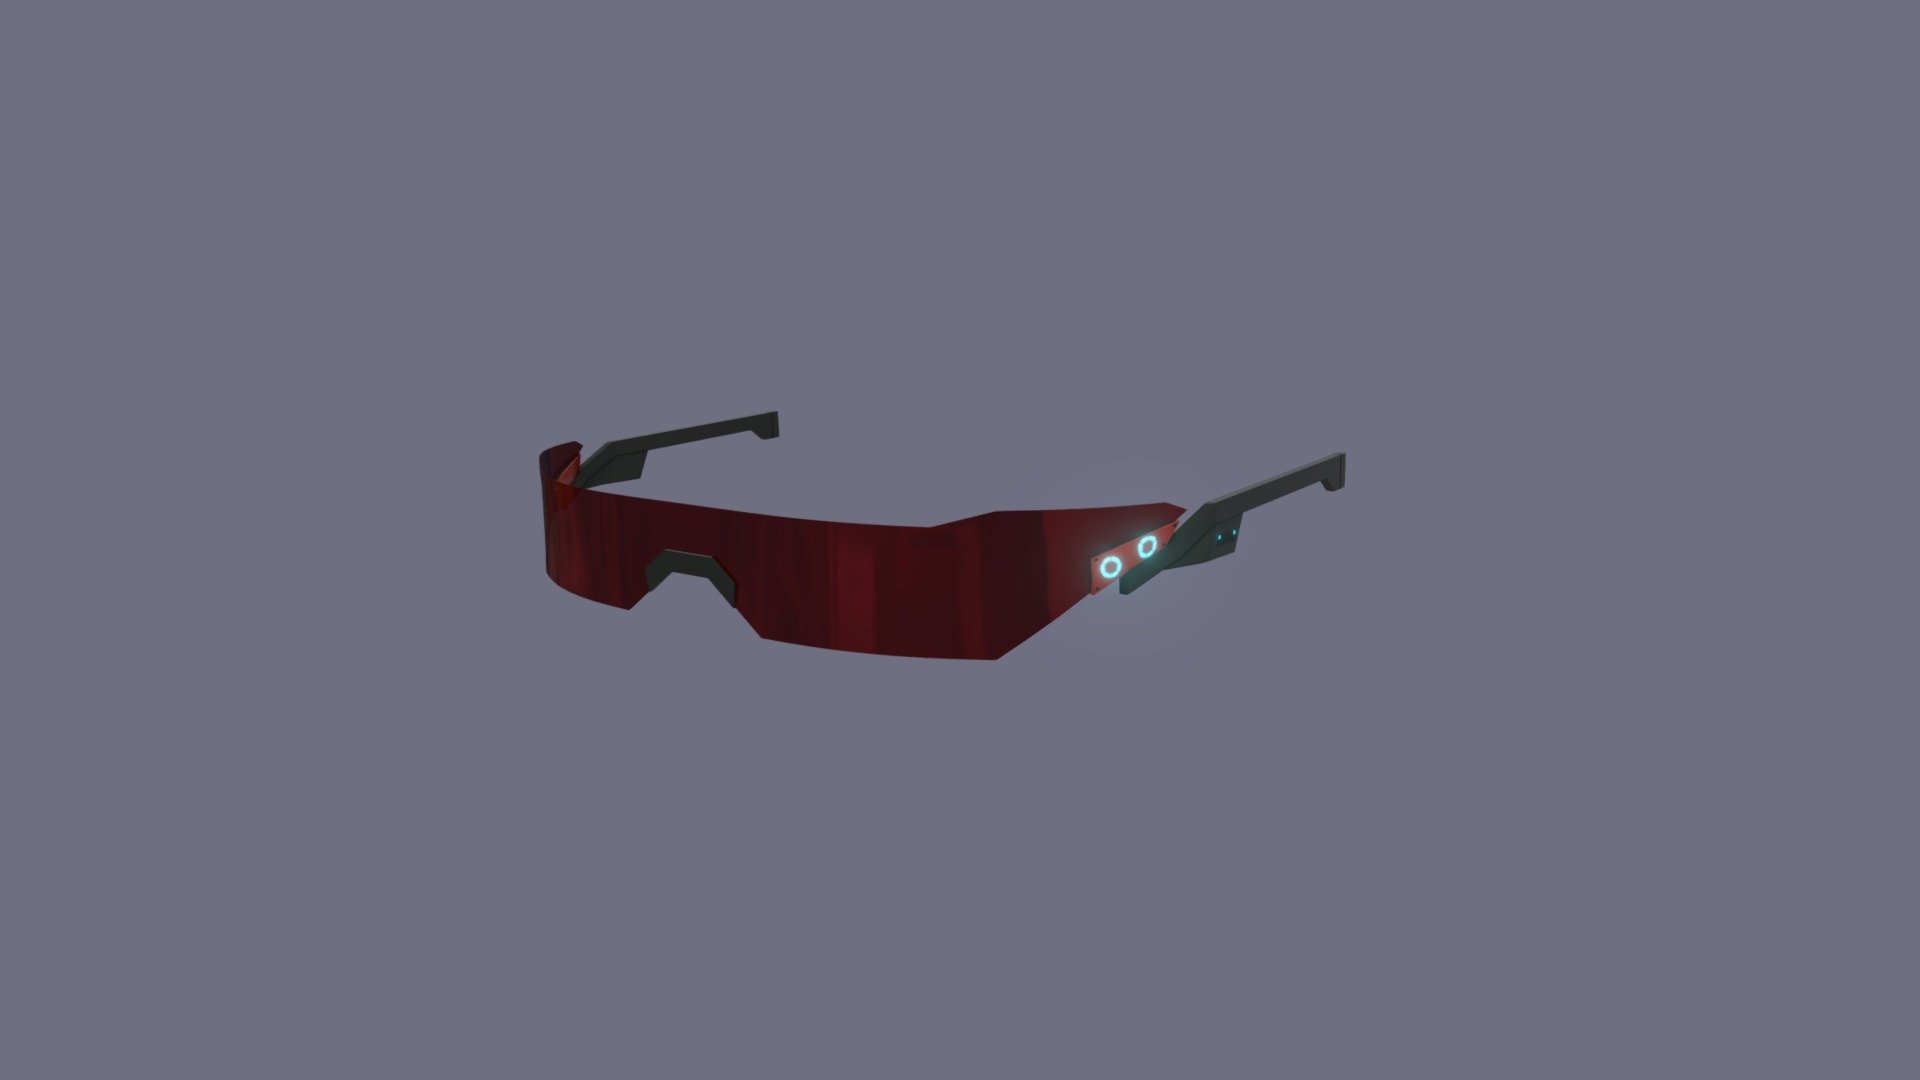 i made a Futuristic Glasses which can be used for 3d animation , poses and video games.
feel free to ask me any details about this mesh 3d model